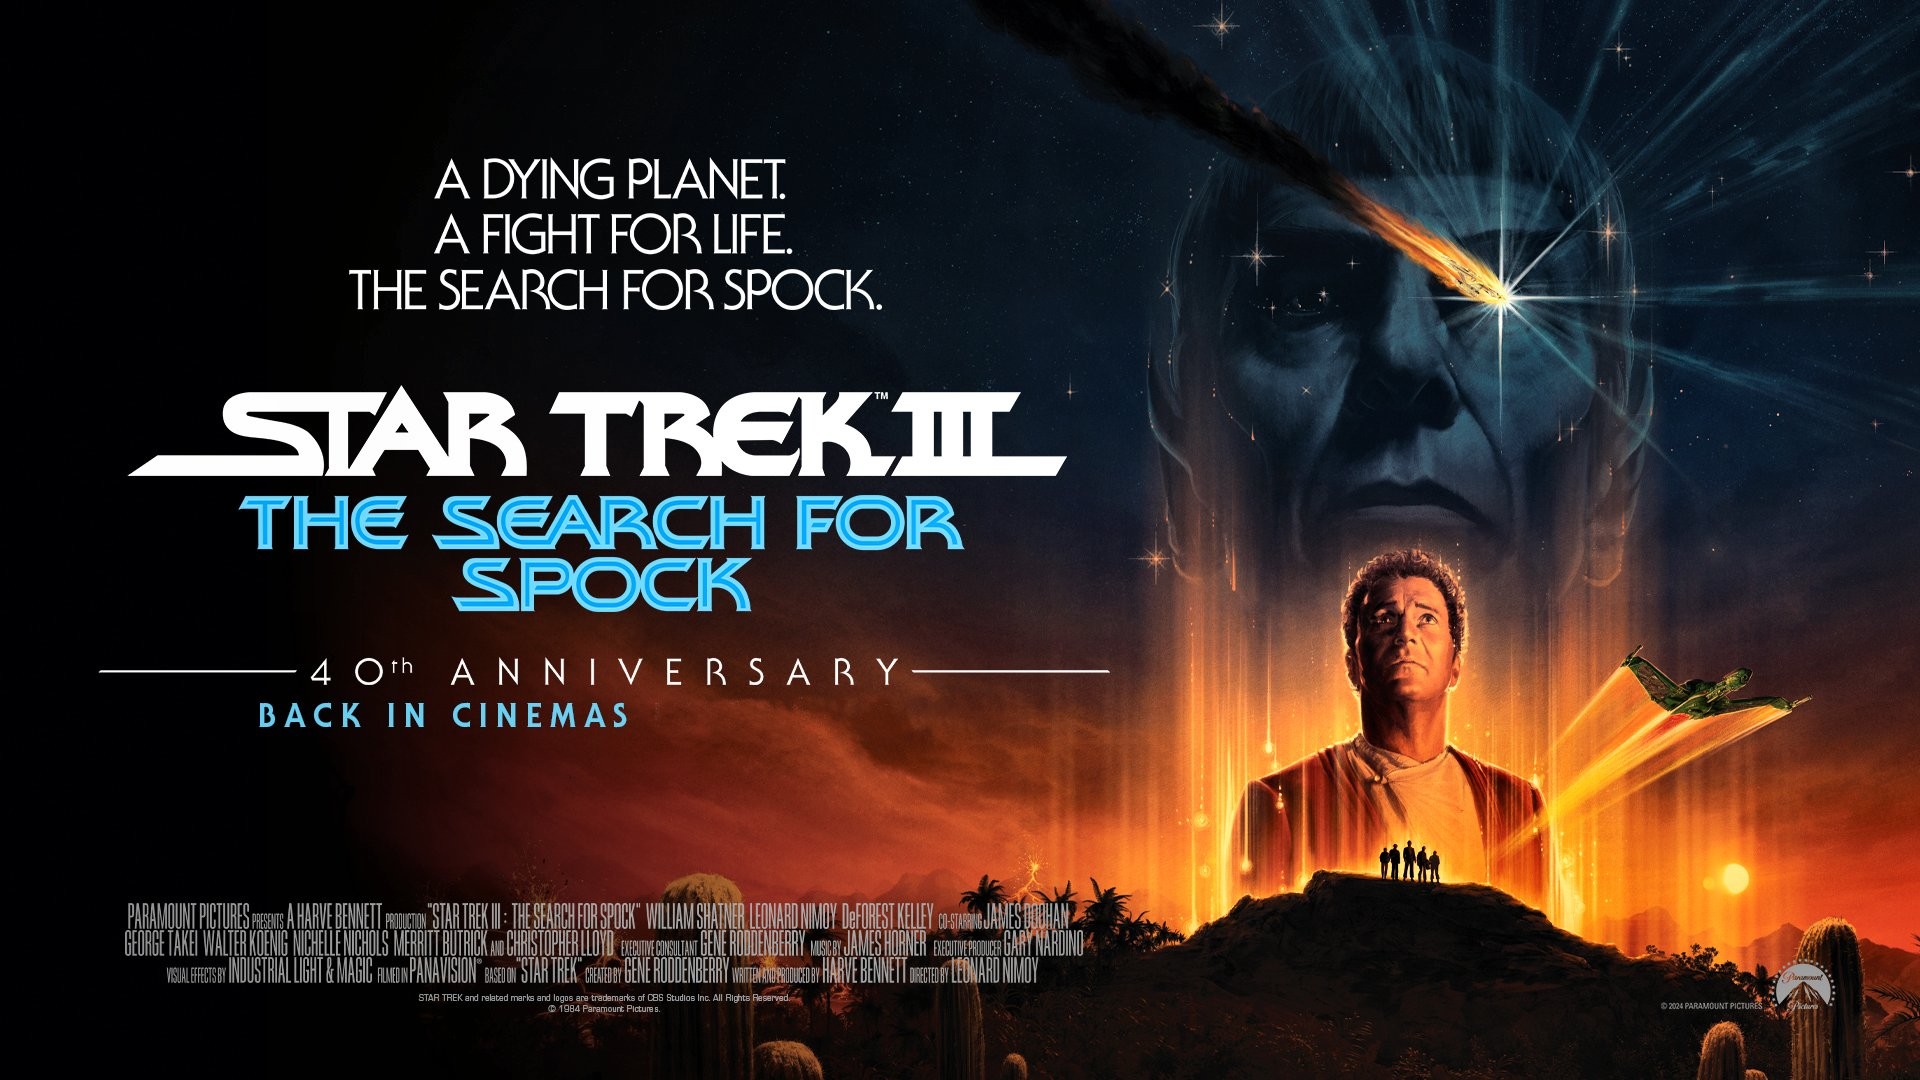 Star Trek 3 - The Search for Spock 40th Anniversary